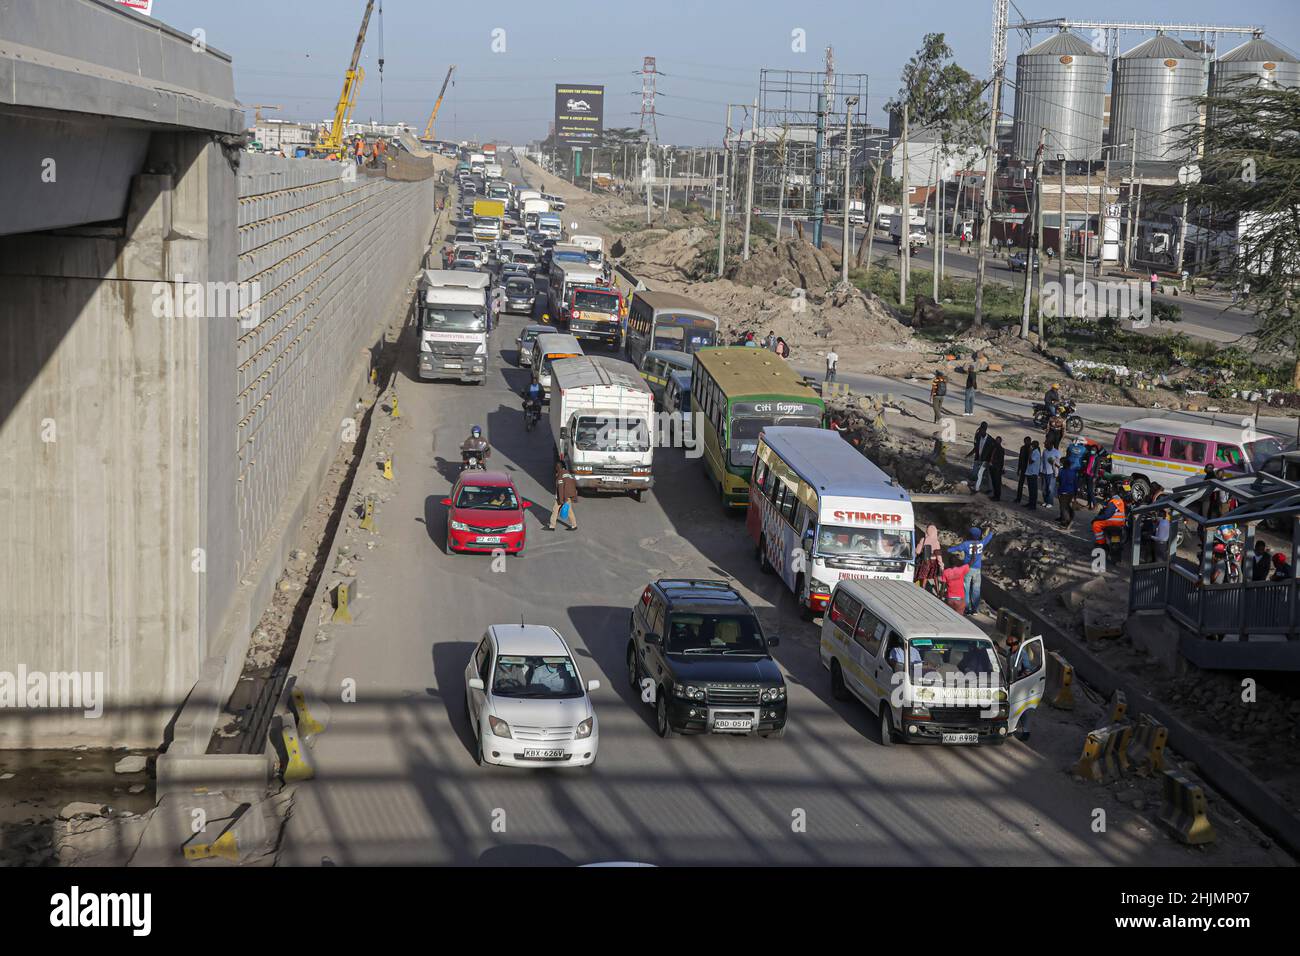 Nairobi, Kenya. 26th Jan, 2022. Traffic pilling up at a temporary bus stop at General motors area a section of the road that is almost complete of the Nairobi Expressway Project along the Mombasa road. The construction of the 27.1km long toll highway, the Nairobi Expressway continues and scheduled to be completed in June 2022. The Nairobi Expressway is meant to decongest the Nairobi city by providing faster and reliable transport. Credit: SOPA Images Limited/Alamy Live News Stock Photo